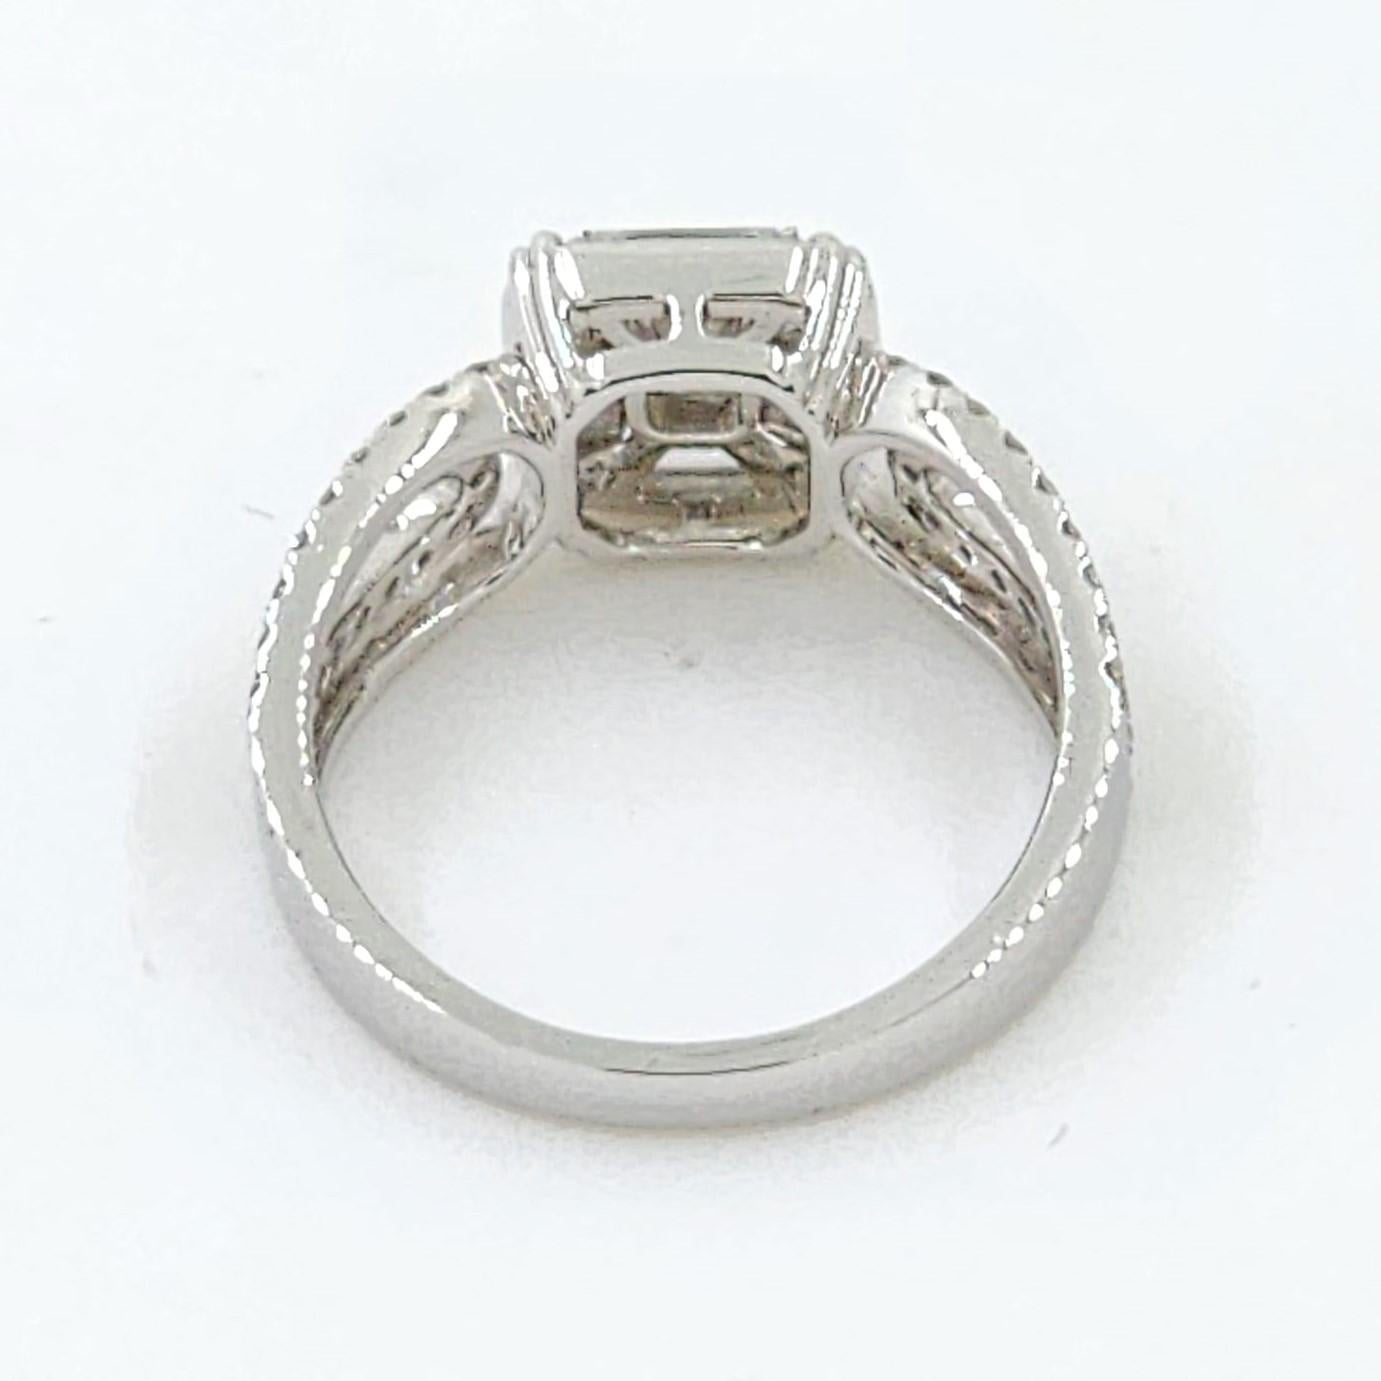 Mixed Cut 1.06 Carat Illusion Setting Diamonds Ring in 18K White Gold For Sale